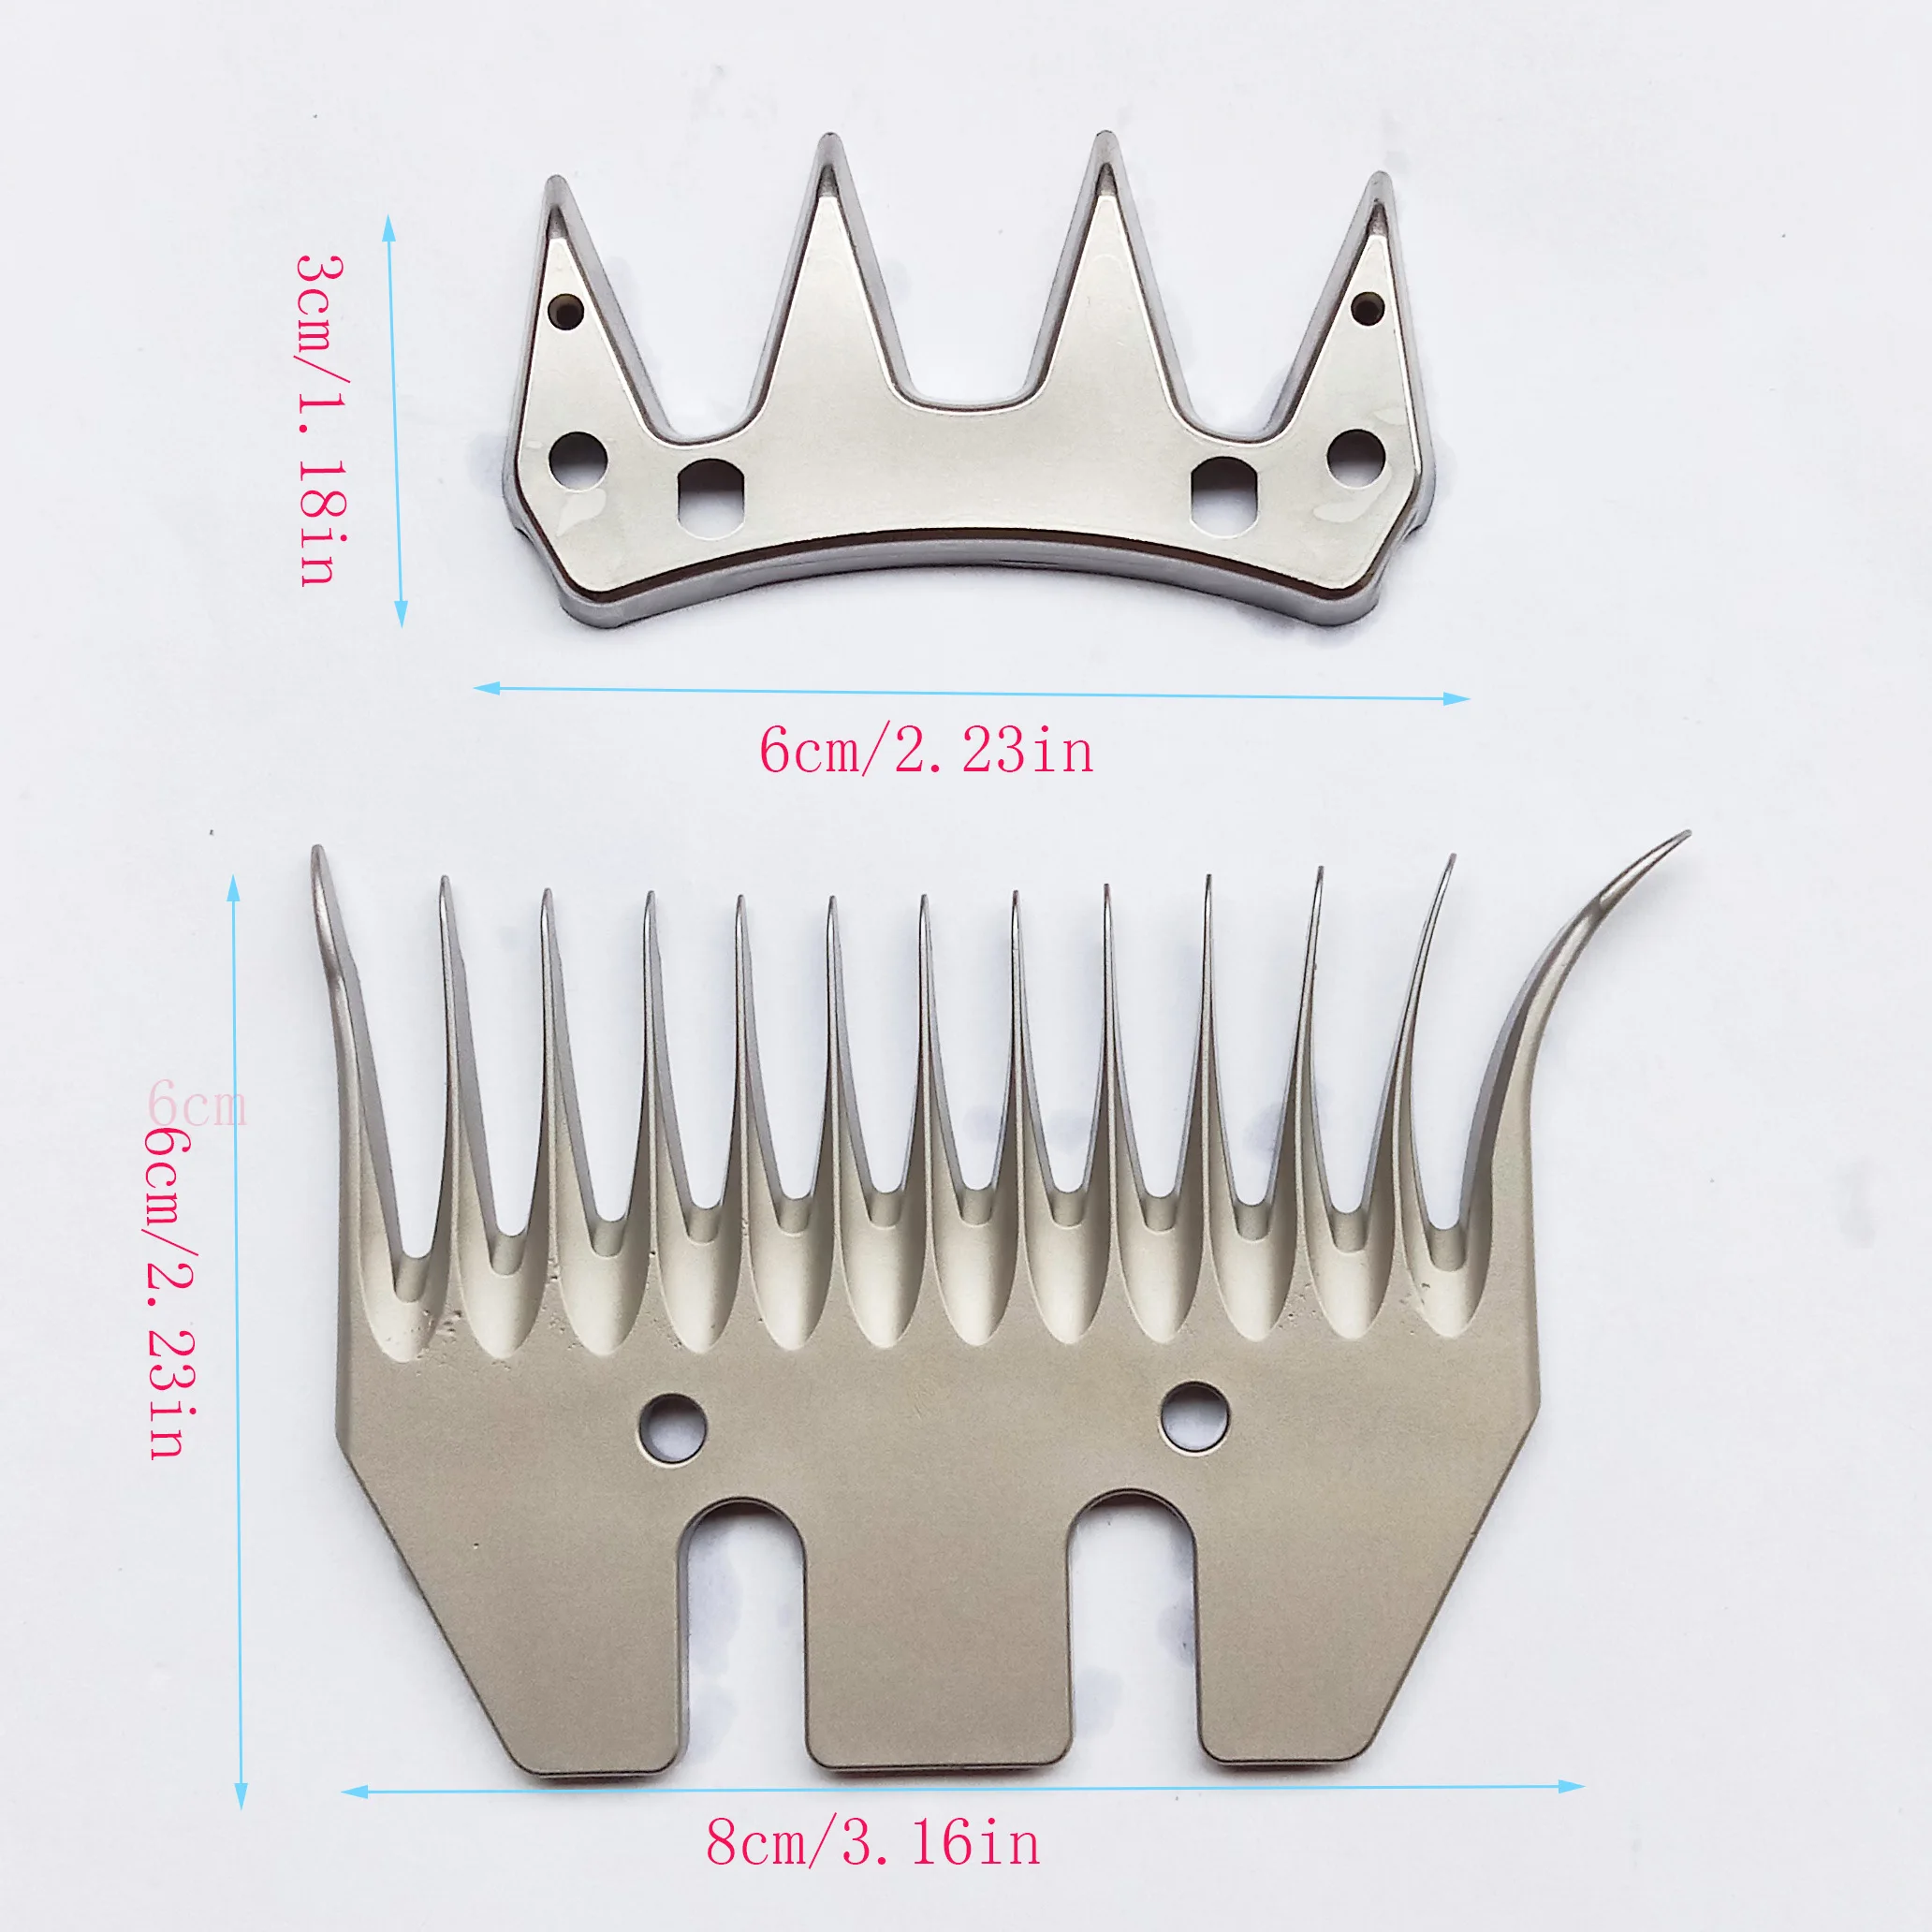 All sizes sheep blade for grooming clipper